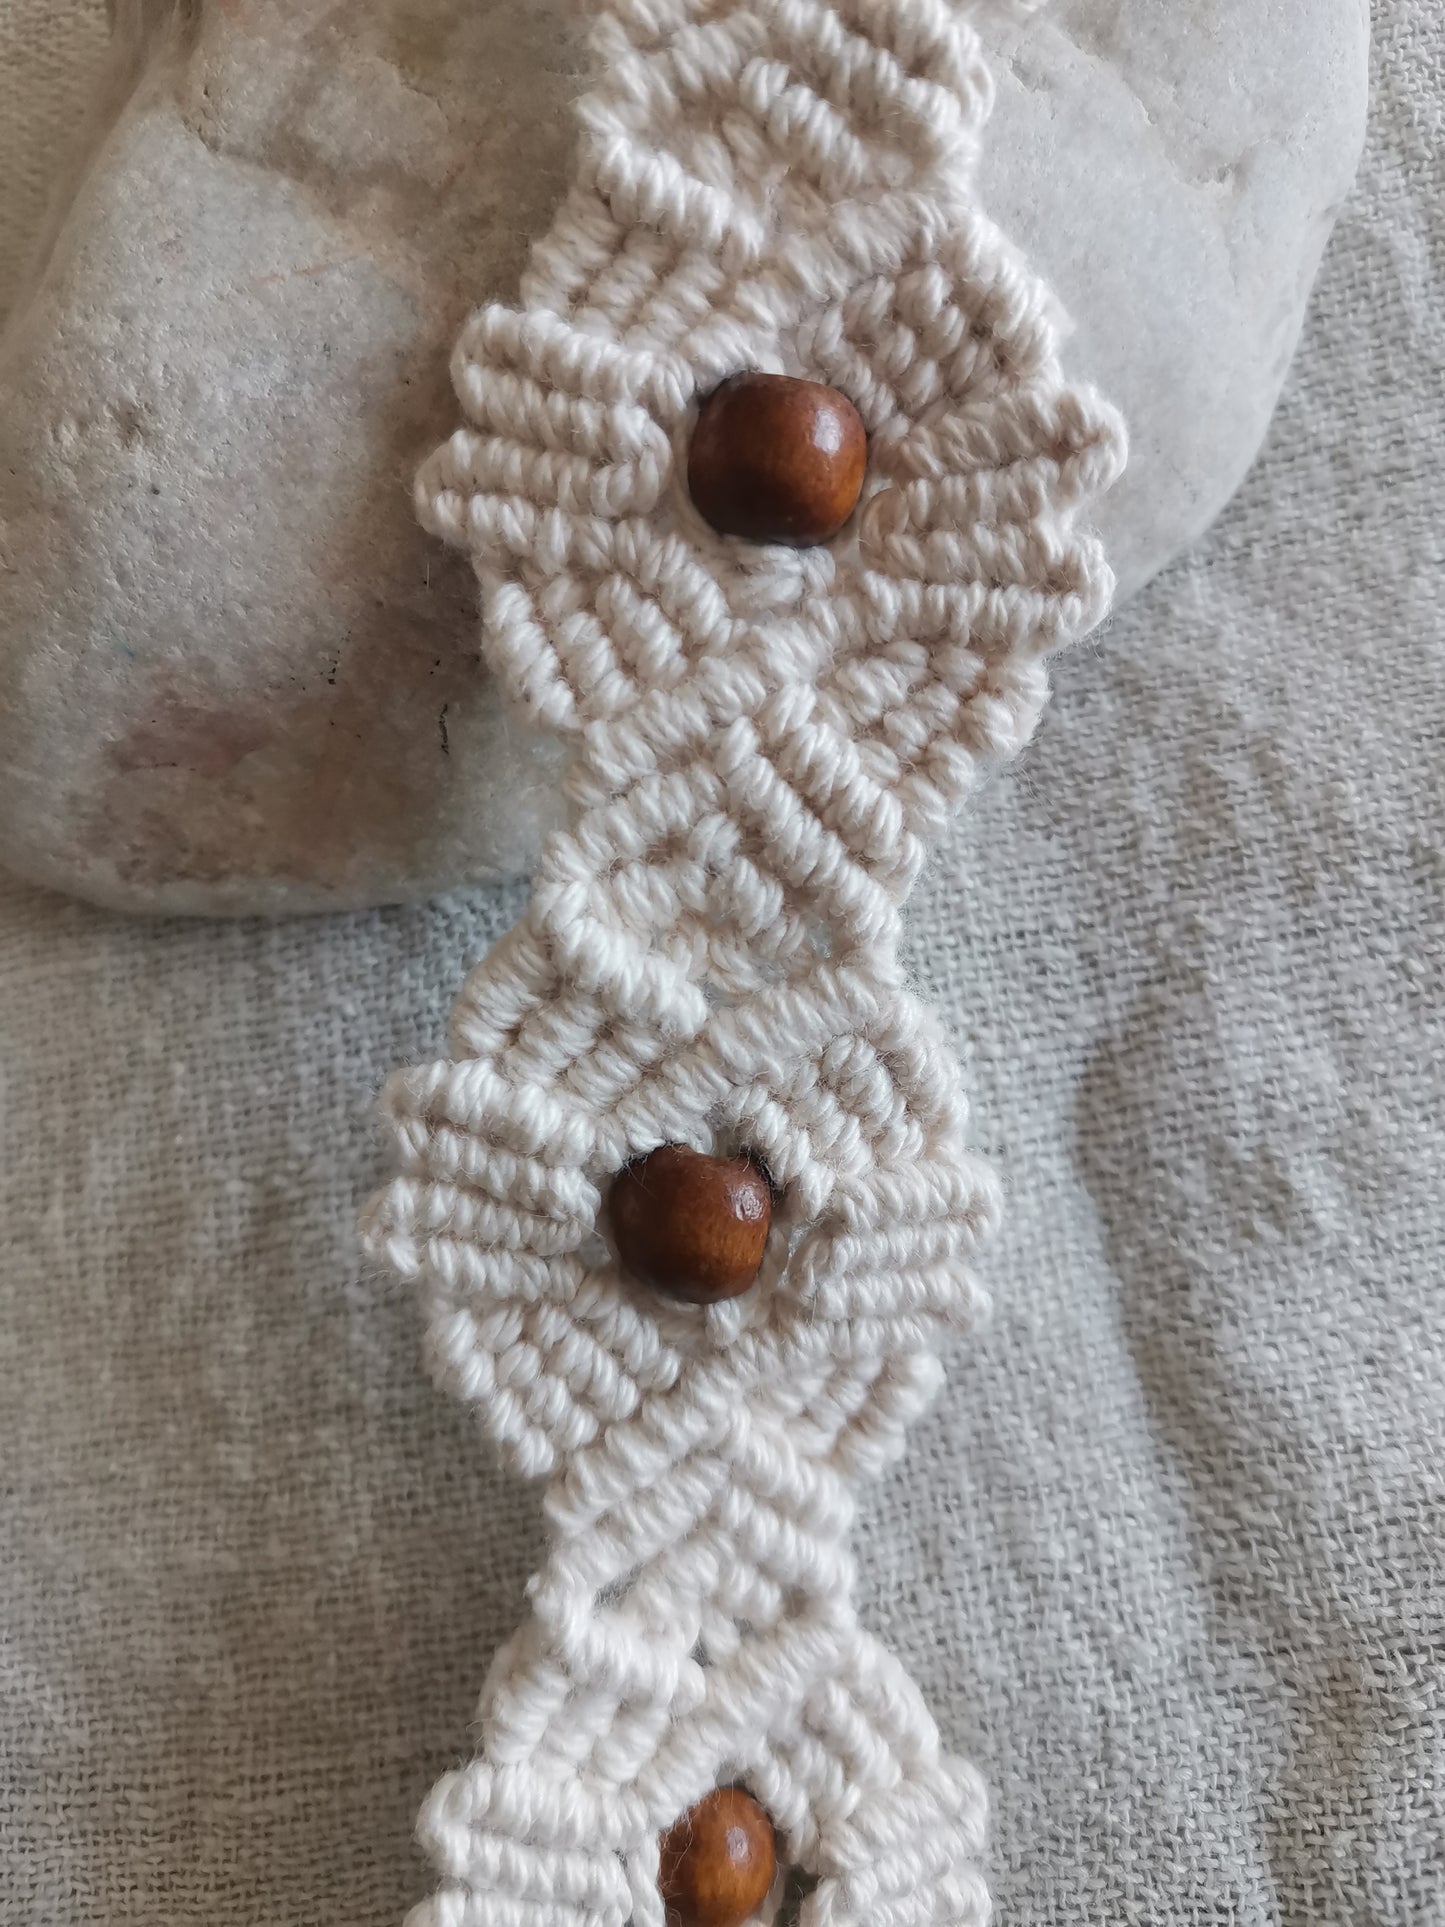 "Jungle Flower" Macrame Bookmark with beads